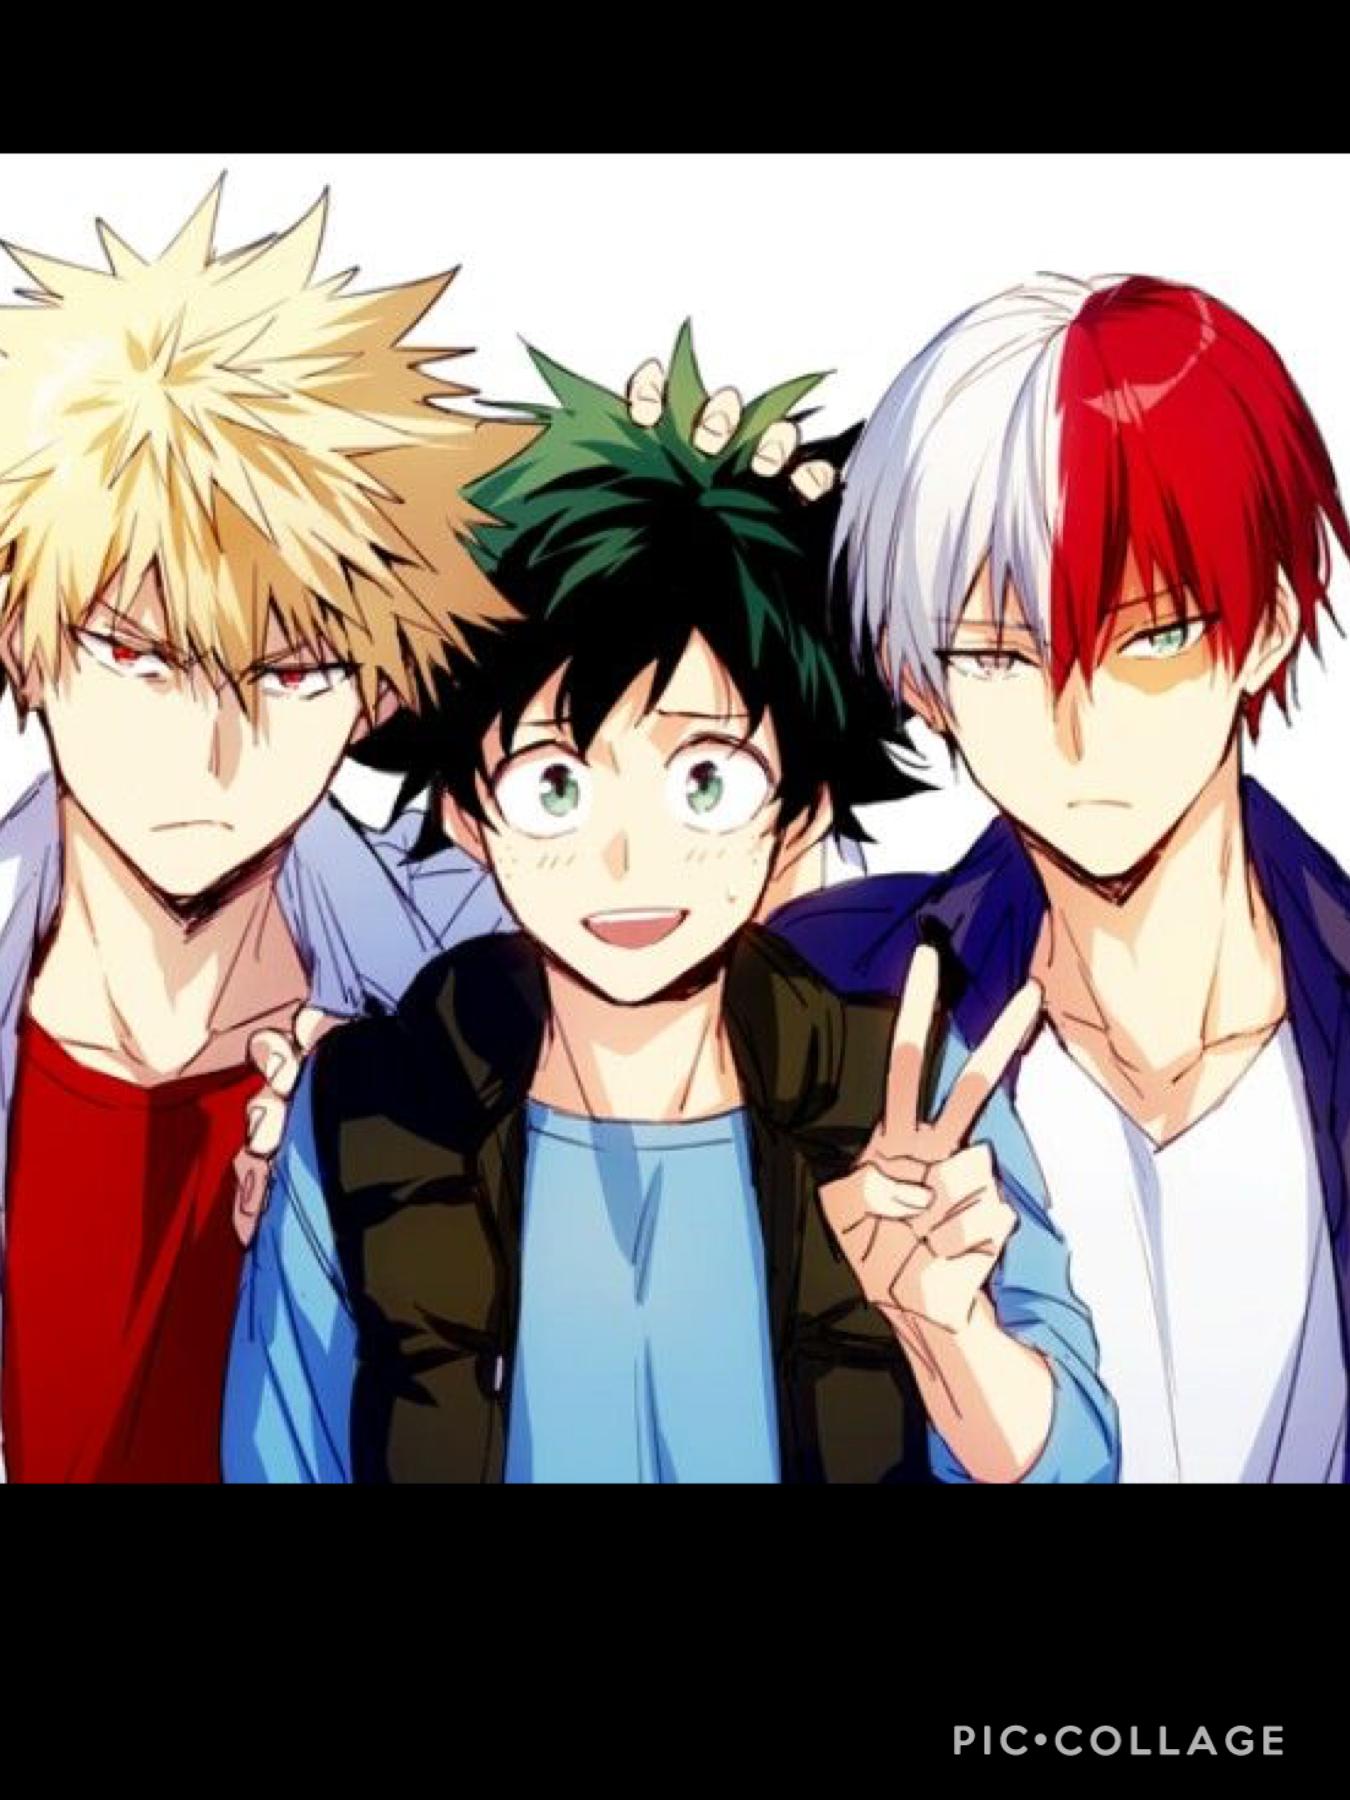 Collage by Bakugo_